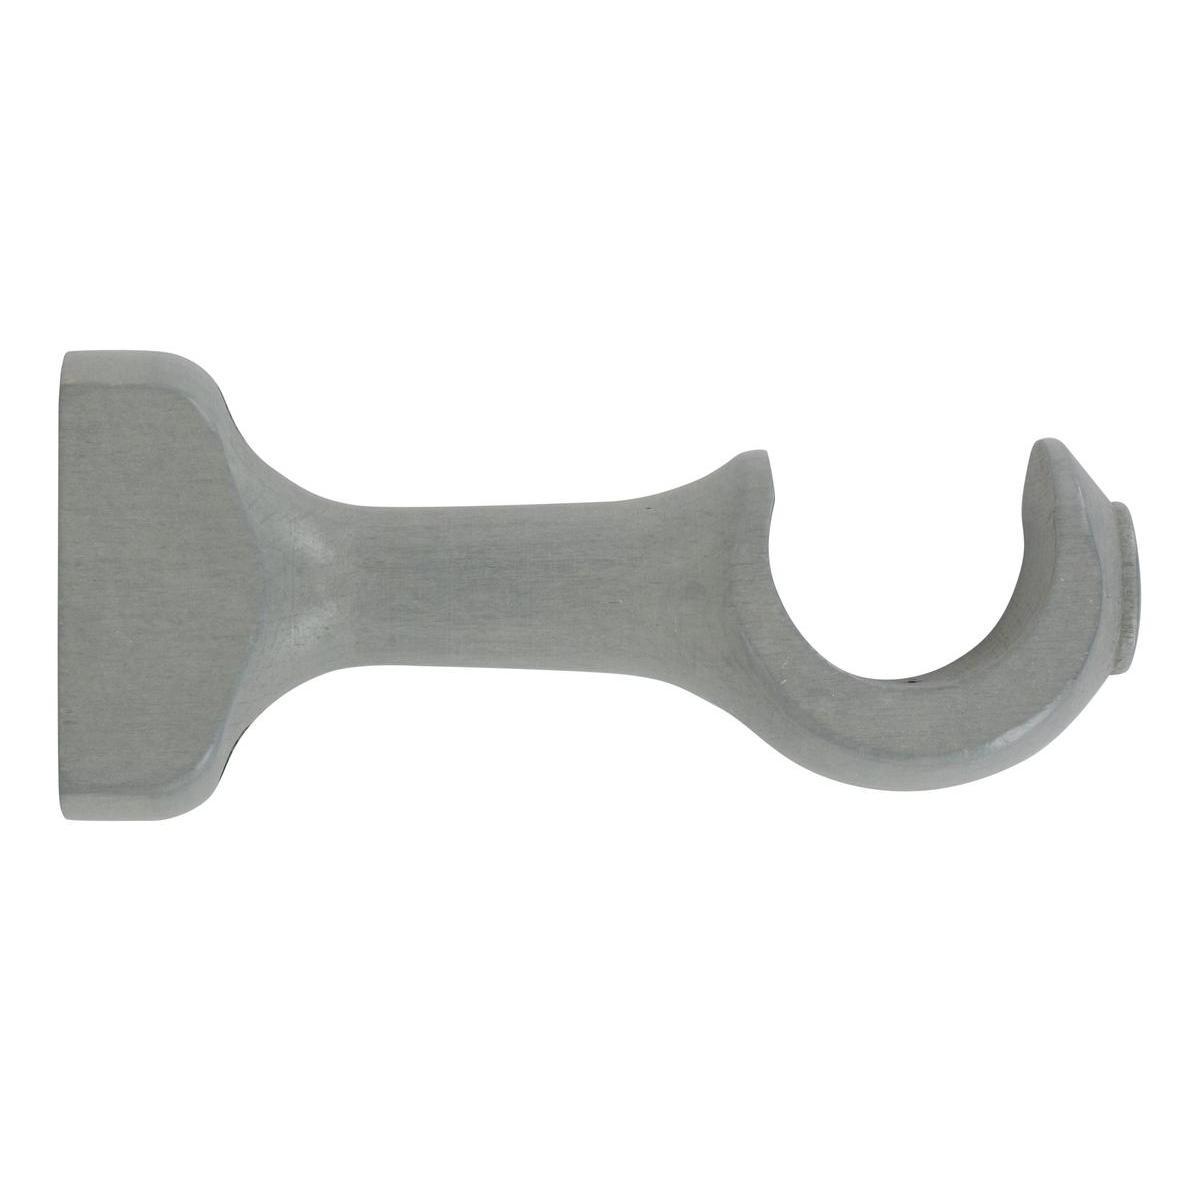 2 Supports ouverts simples - ø2,8 cm - Gris